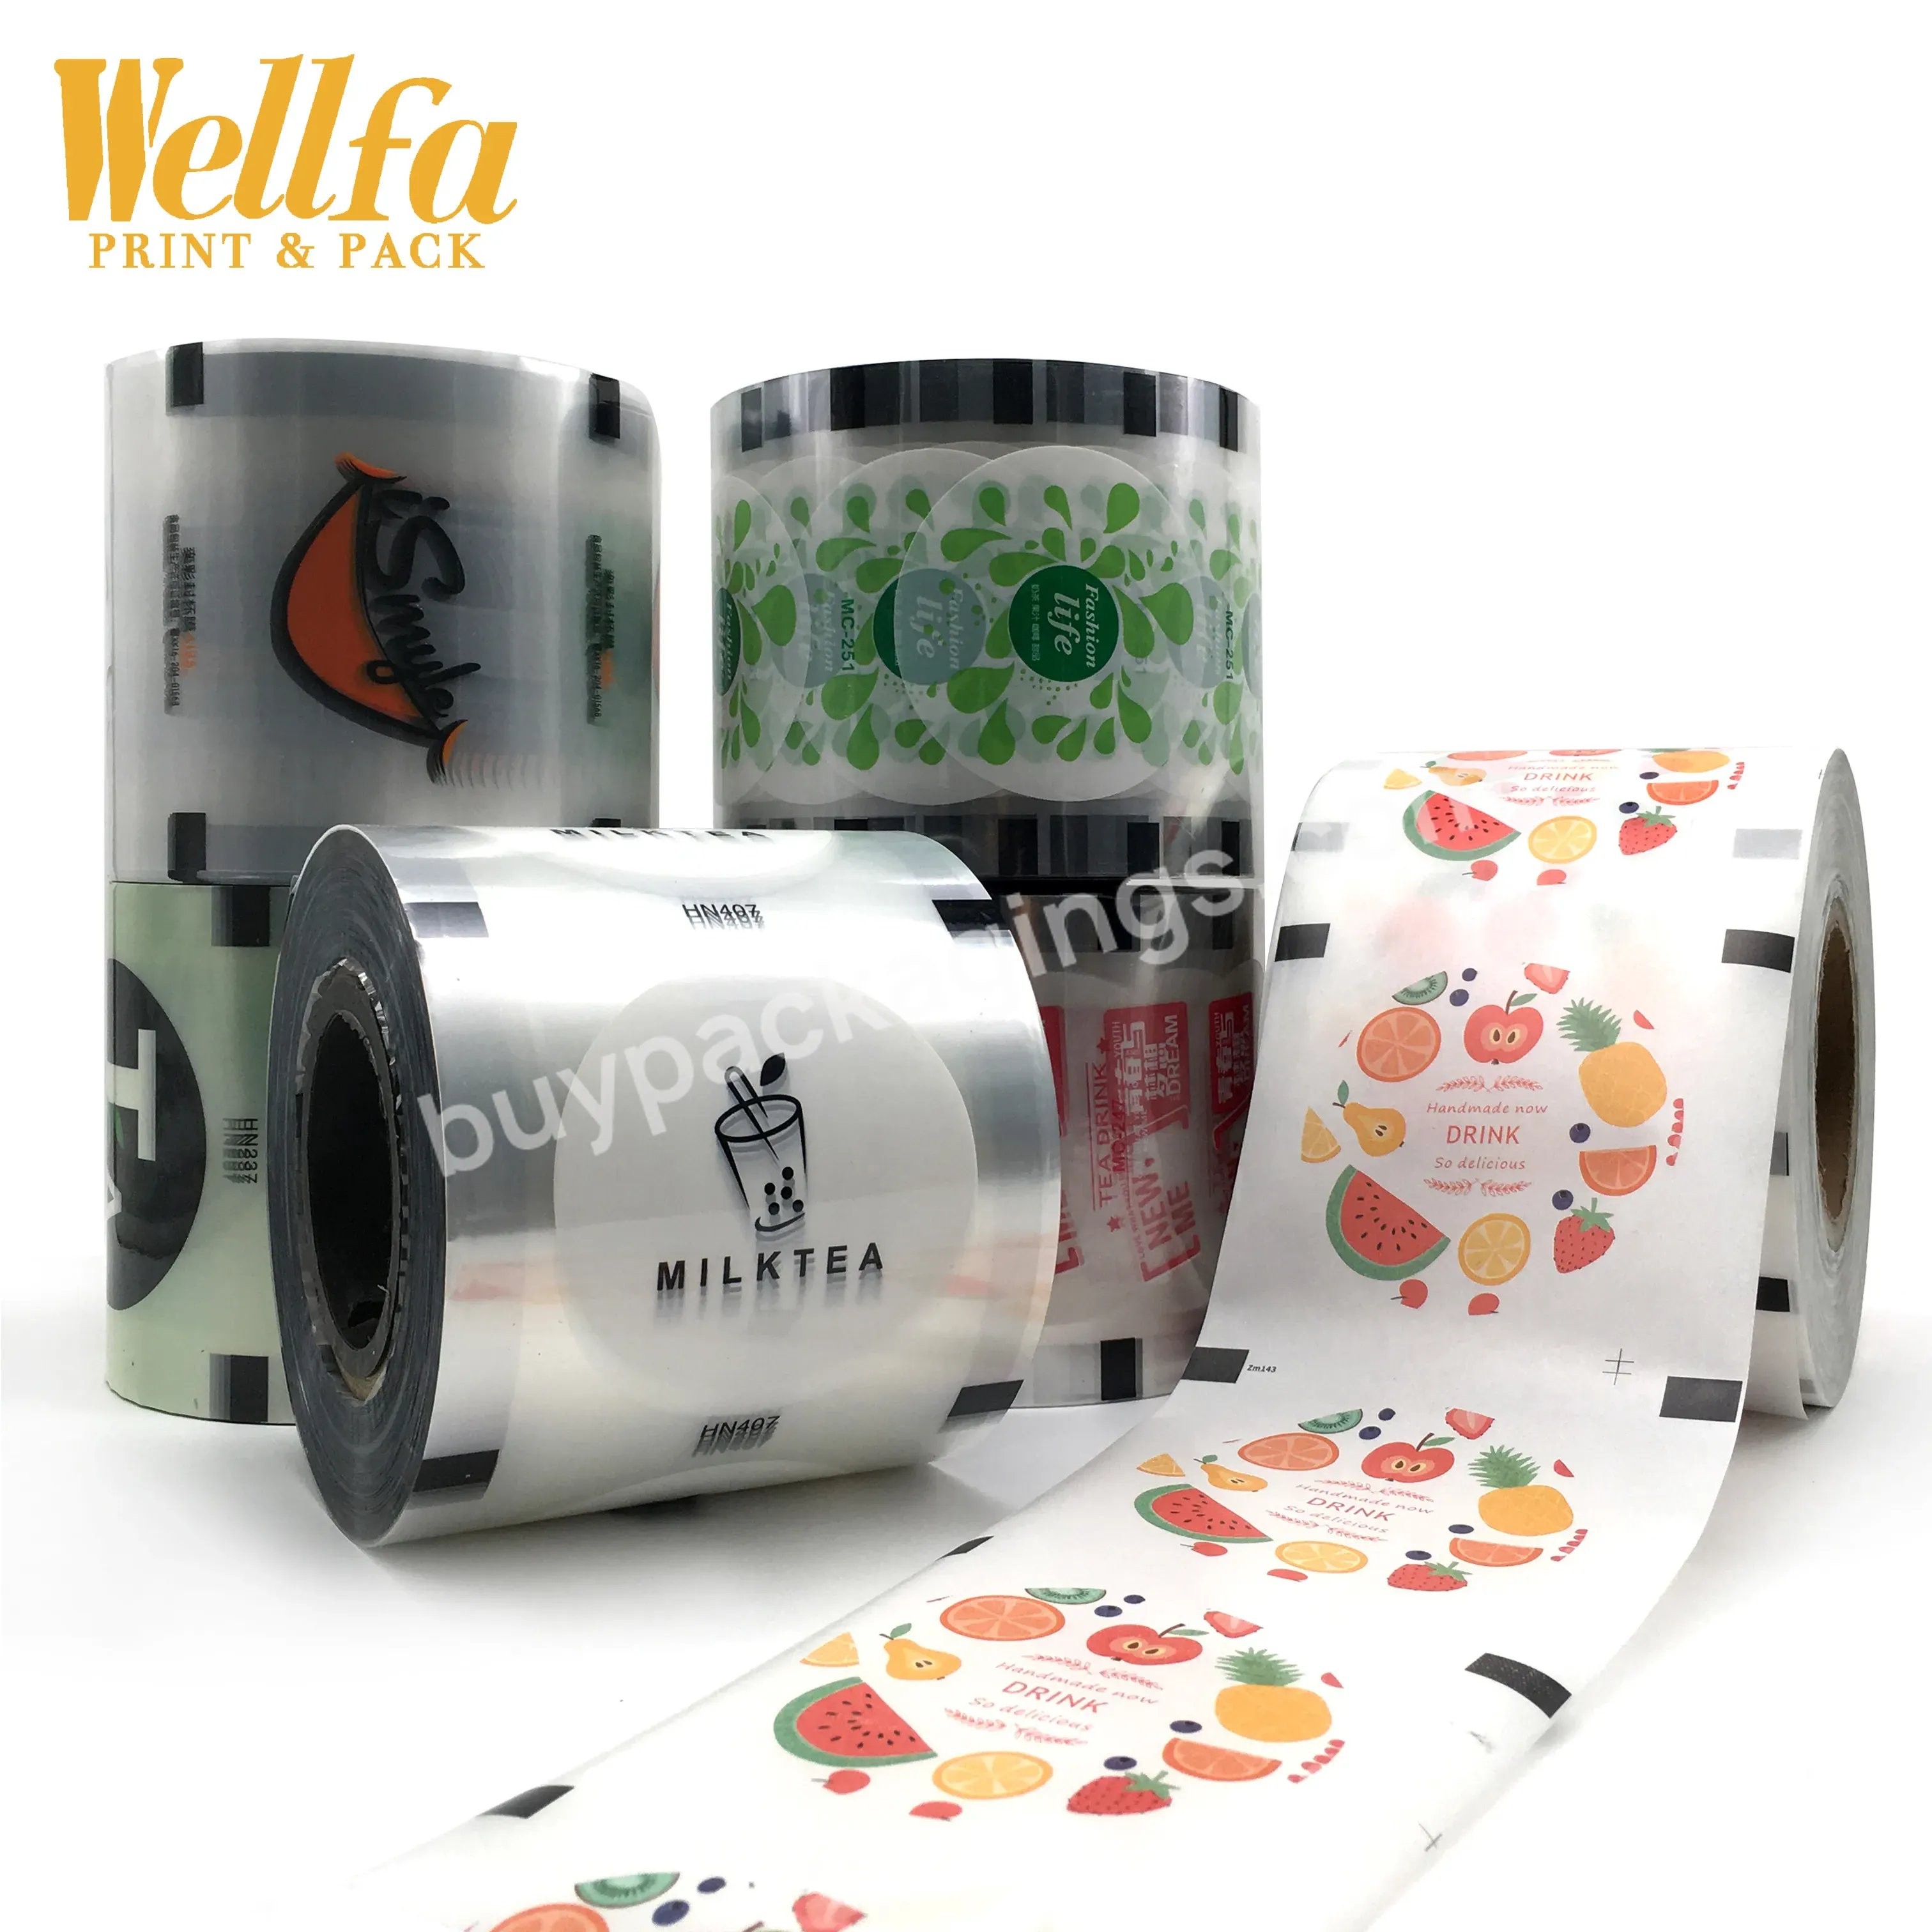 Factory Customized Oem Printed Laminating Flexible Packaging Sachet Roll For Auto Packing Cup Sealing Film Plastic Films - Buy Bopp/vmpet/pe Flexible Bubble Tea Sealing Film,Heat Sealable Food Packaging Film Roll,Customized Drink Auto Packaging Film.